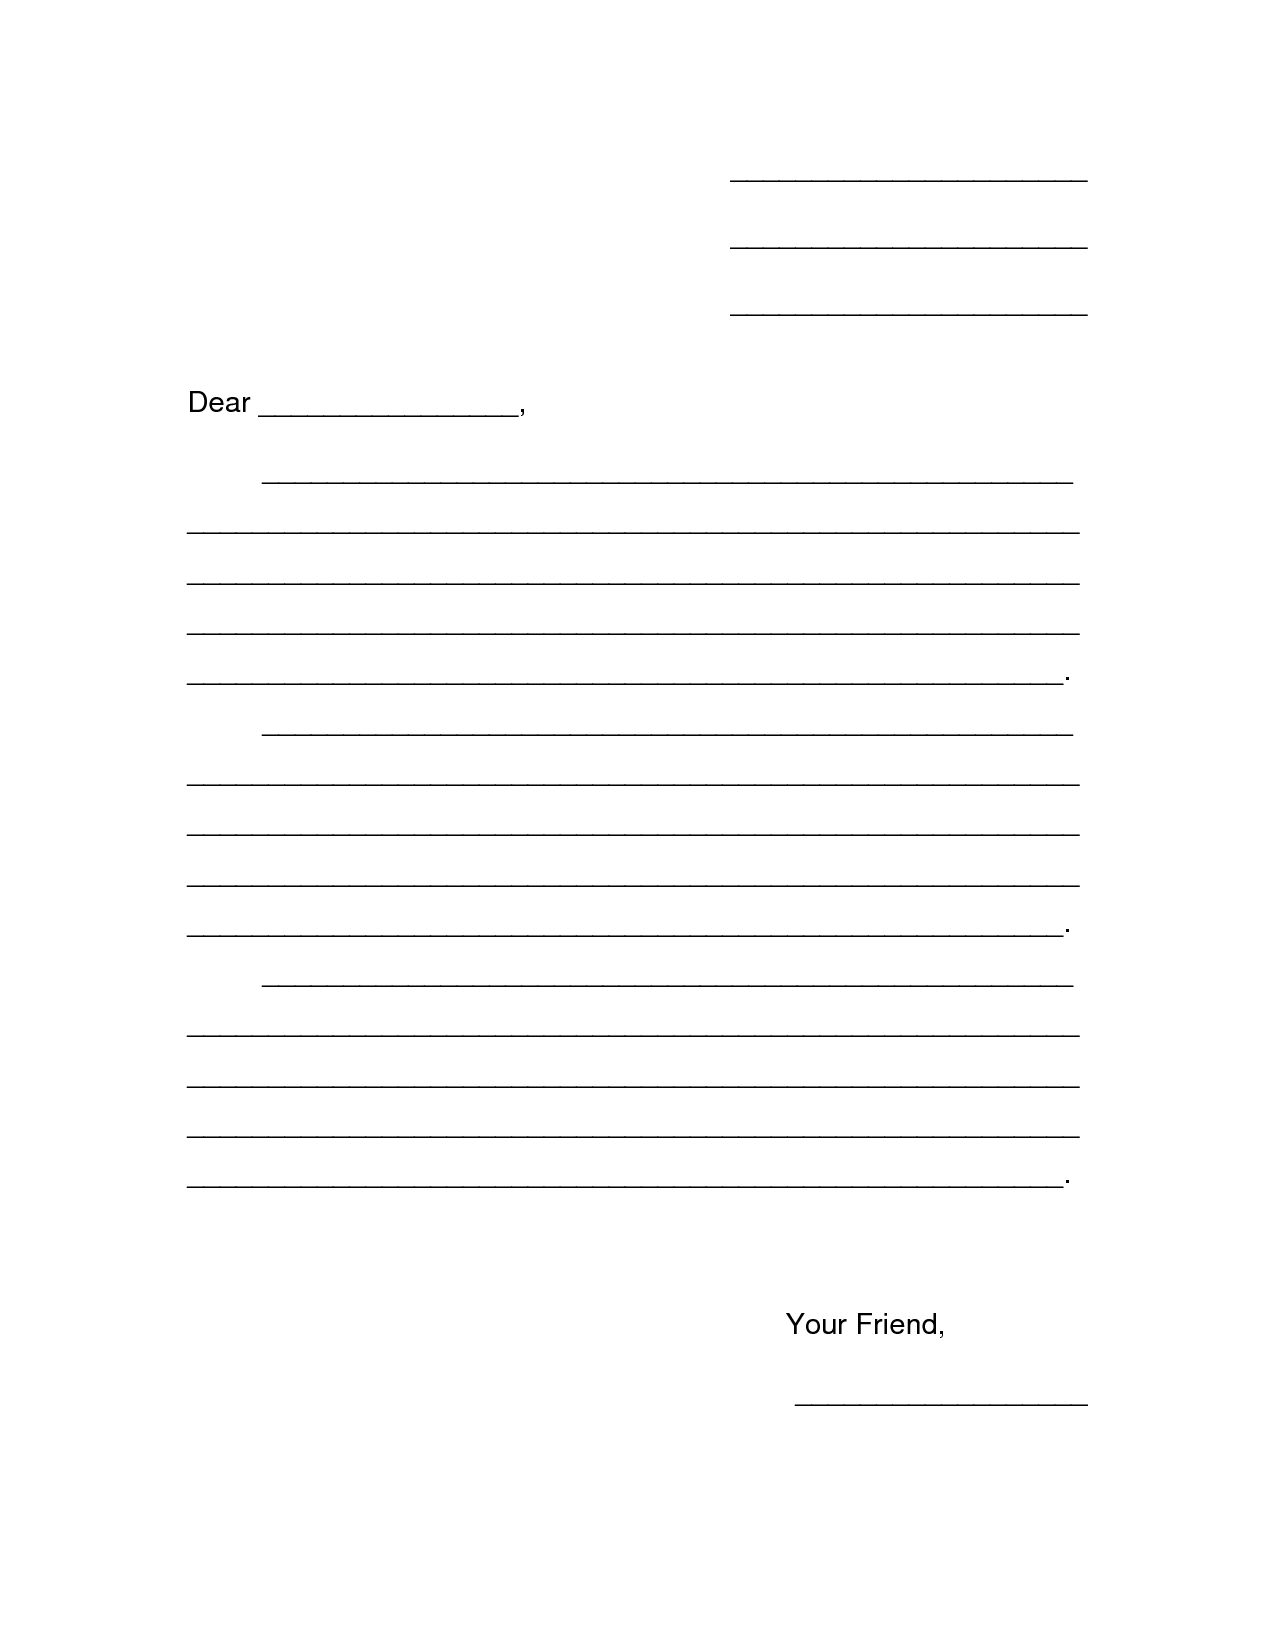 Blank Friendly Letter Template Image